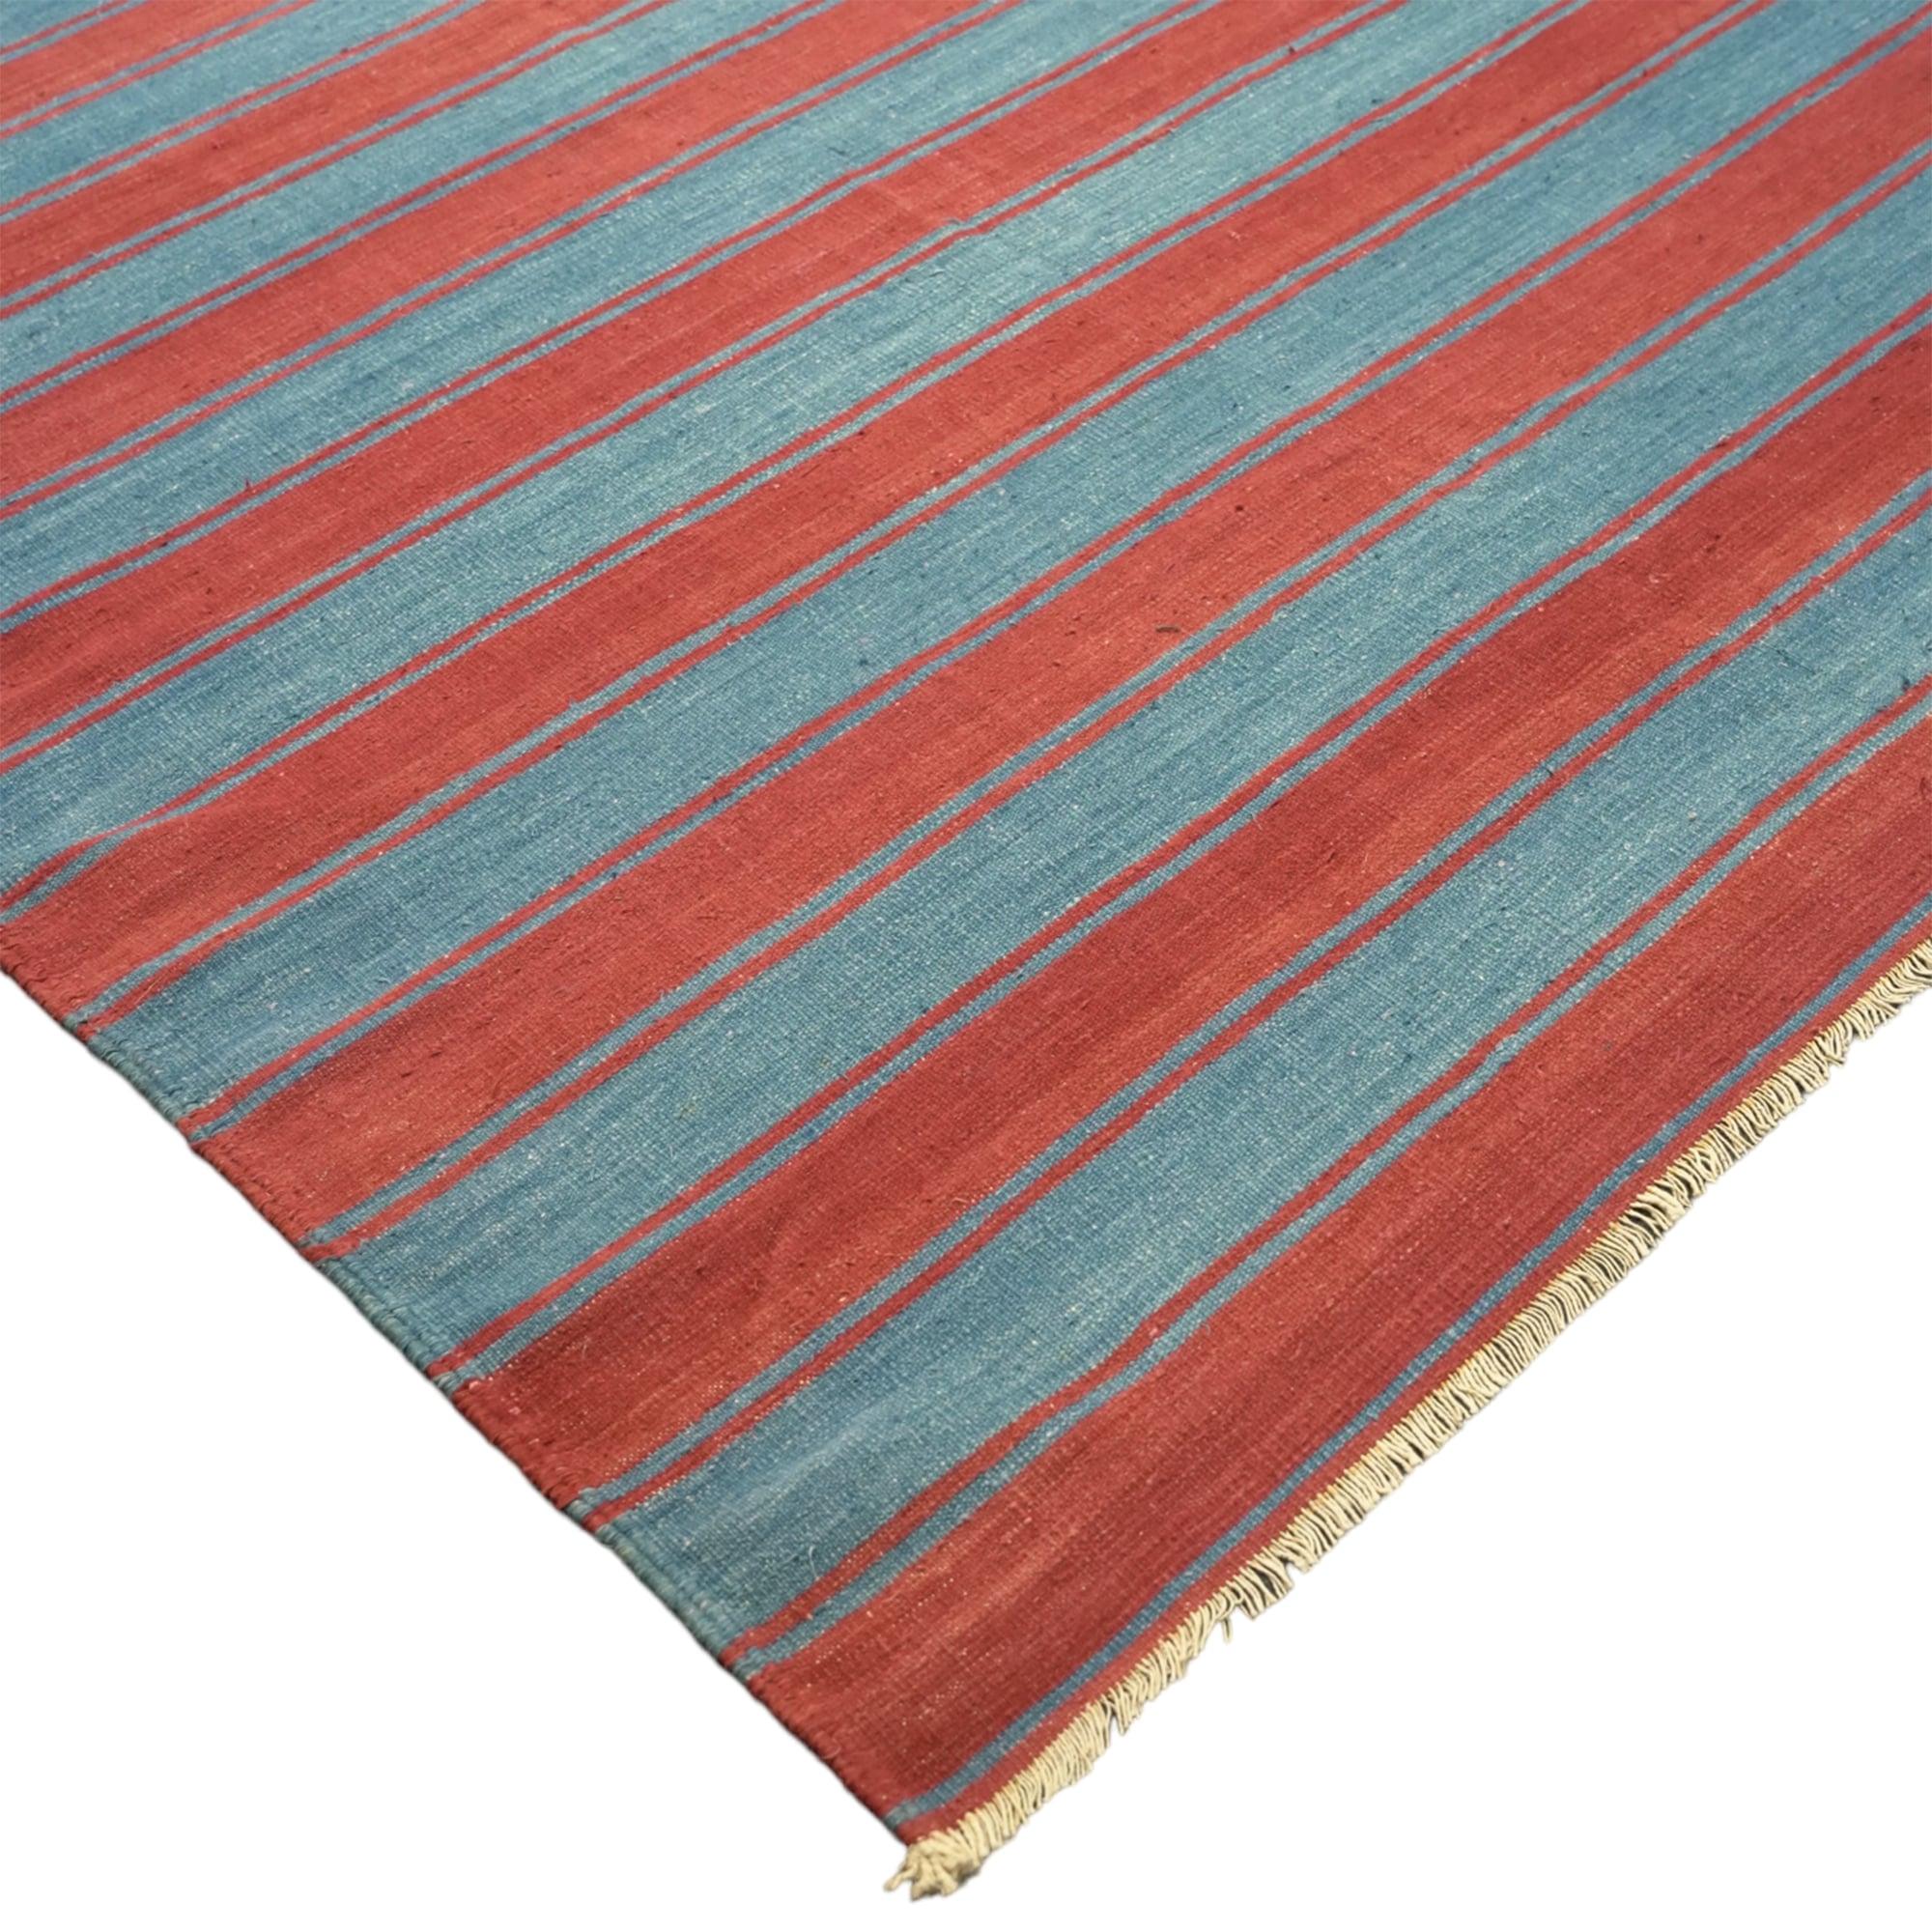 Vintage Dhurrie Rug, with Red and Blue Stripes, from Rug & Kilim In Good Condition For Sale In Long Island City, NY